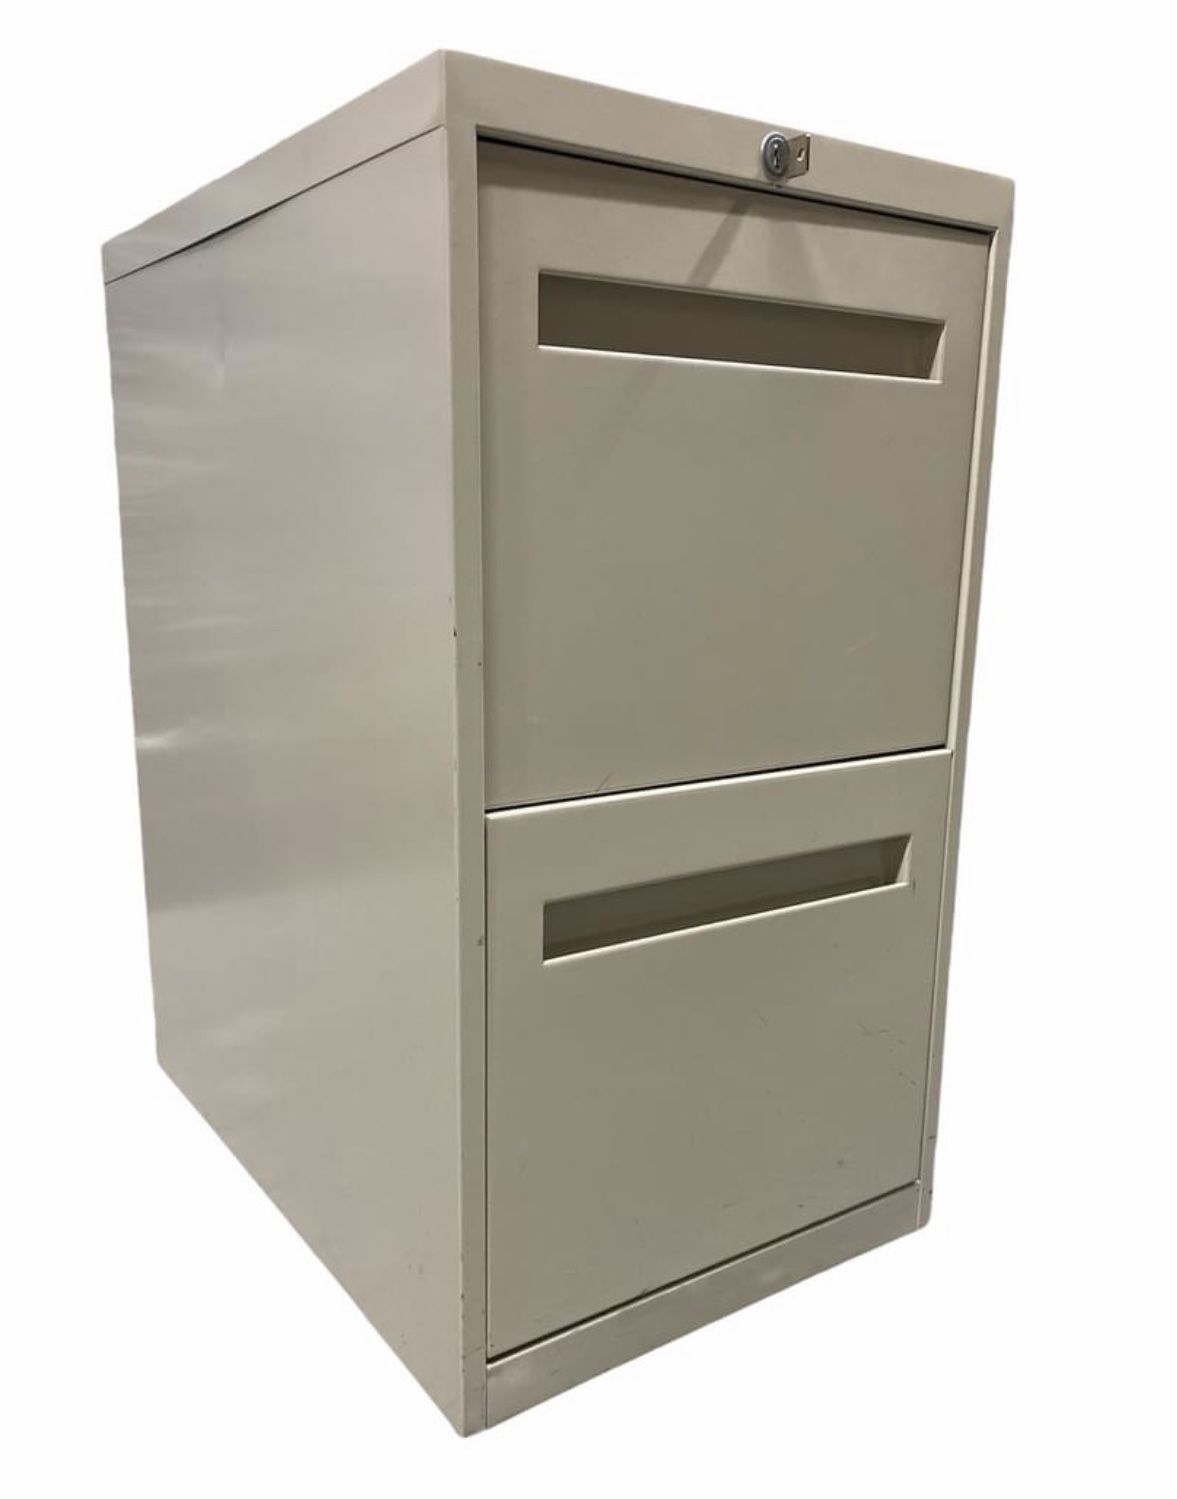 Heavy Metal File Cabinet by TEKNION 2 DRAWERS Organize your life or business! (COMMERCIAL GRADE)